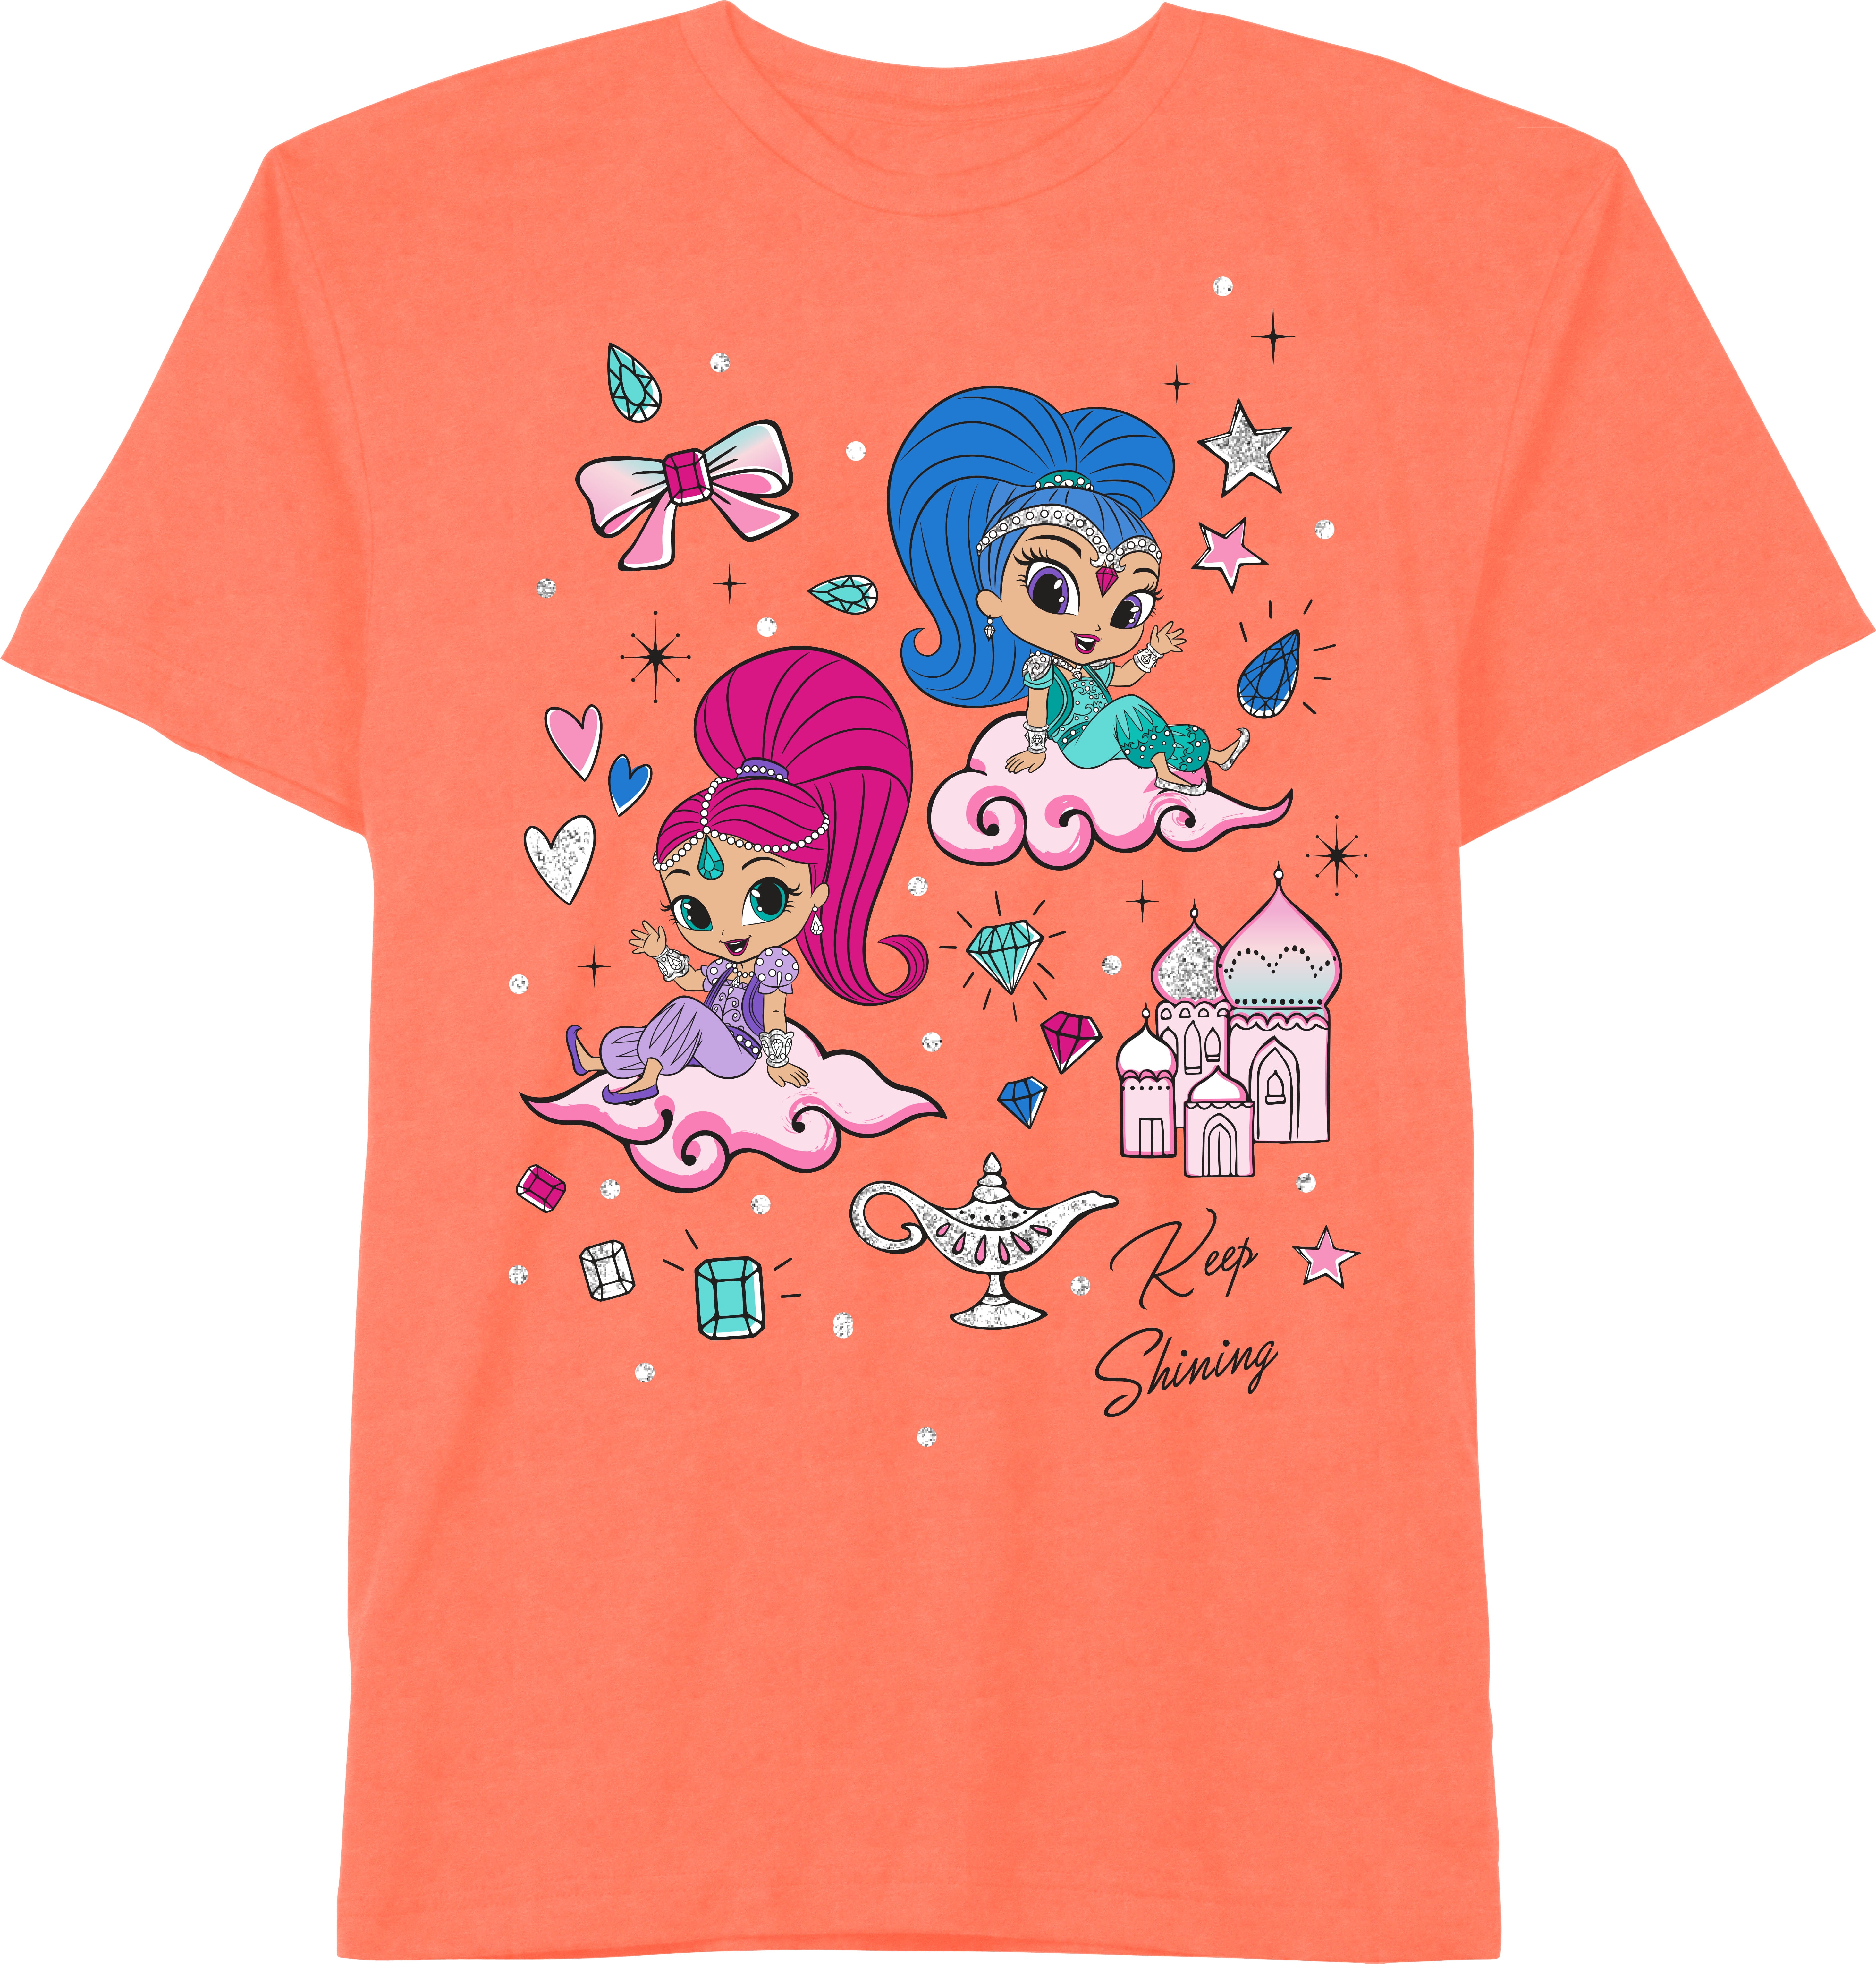 Girls' Nickelodeon Shimmer and Shine T Shirt  LIVE LOVE SPARKLE 14/16 NWT  XL